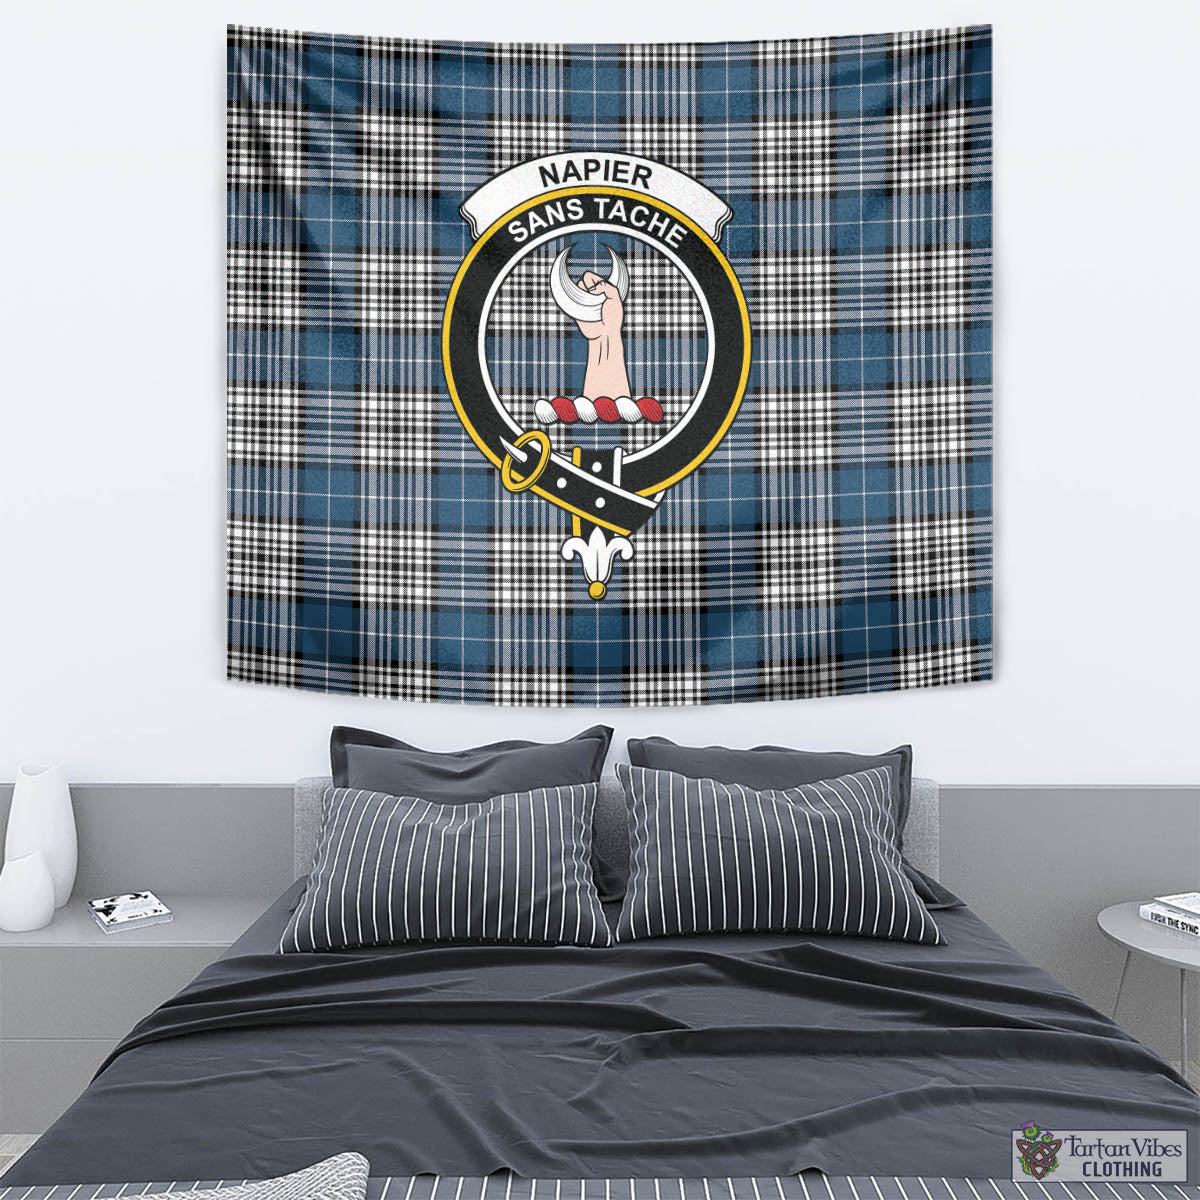 Tartan Vibes Clothing Napier Modern Tartan Tapestry Wall Hanging and Home Decor for Room with Family Crest